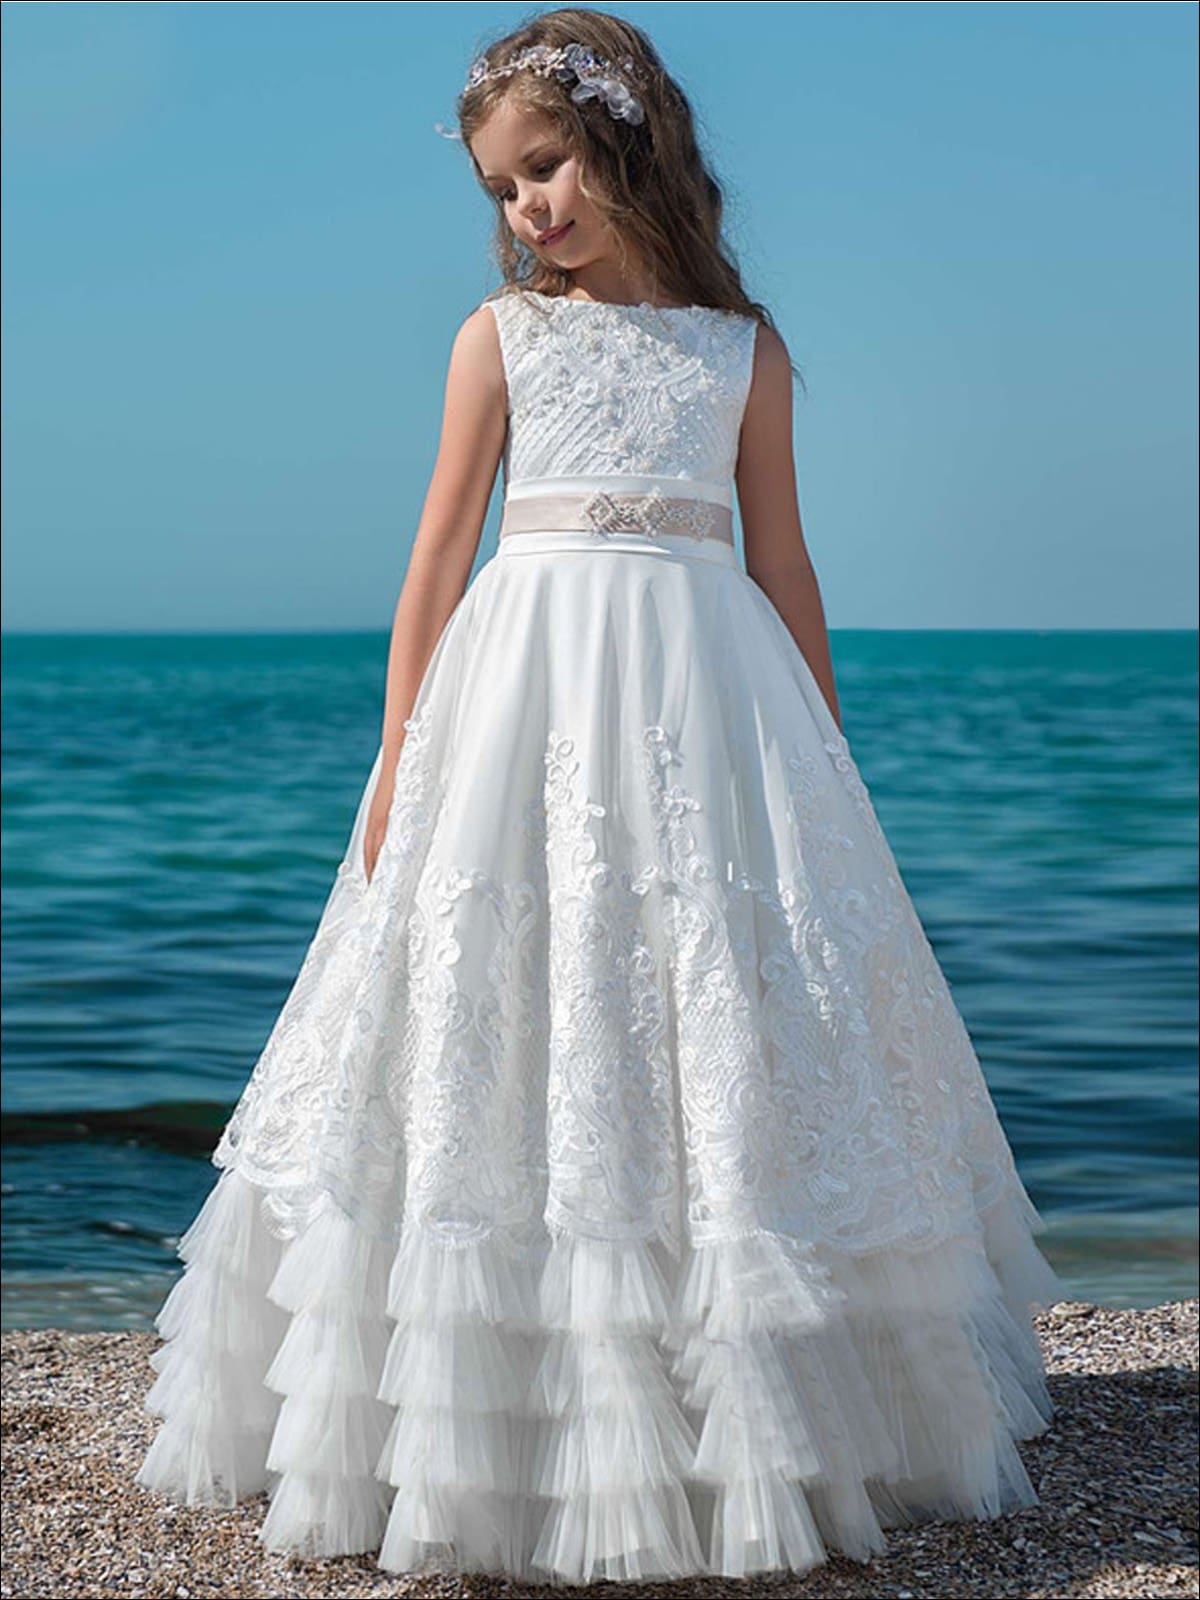 Girls Lace Ruffled White Communion Gown - White / 2T - Girls Gowns